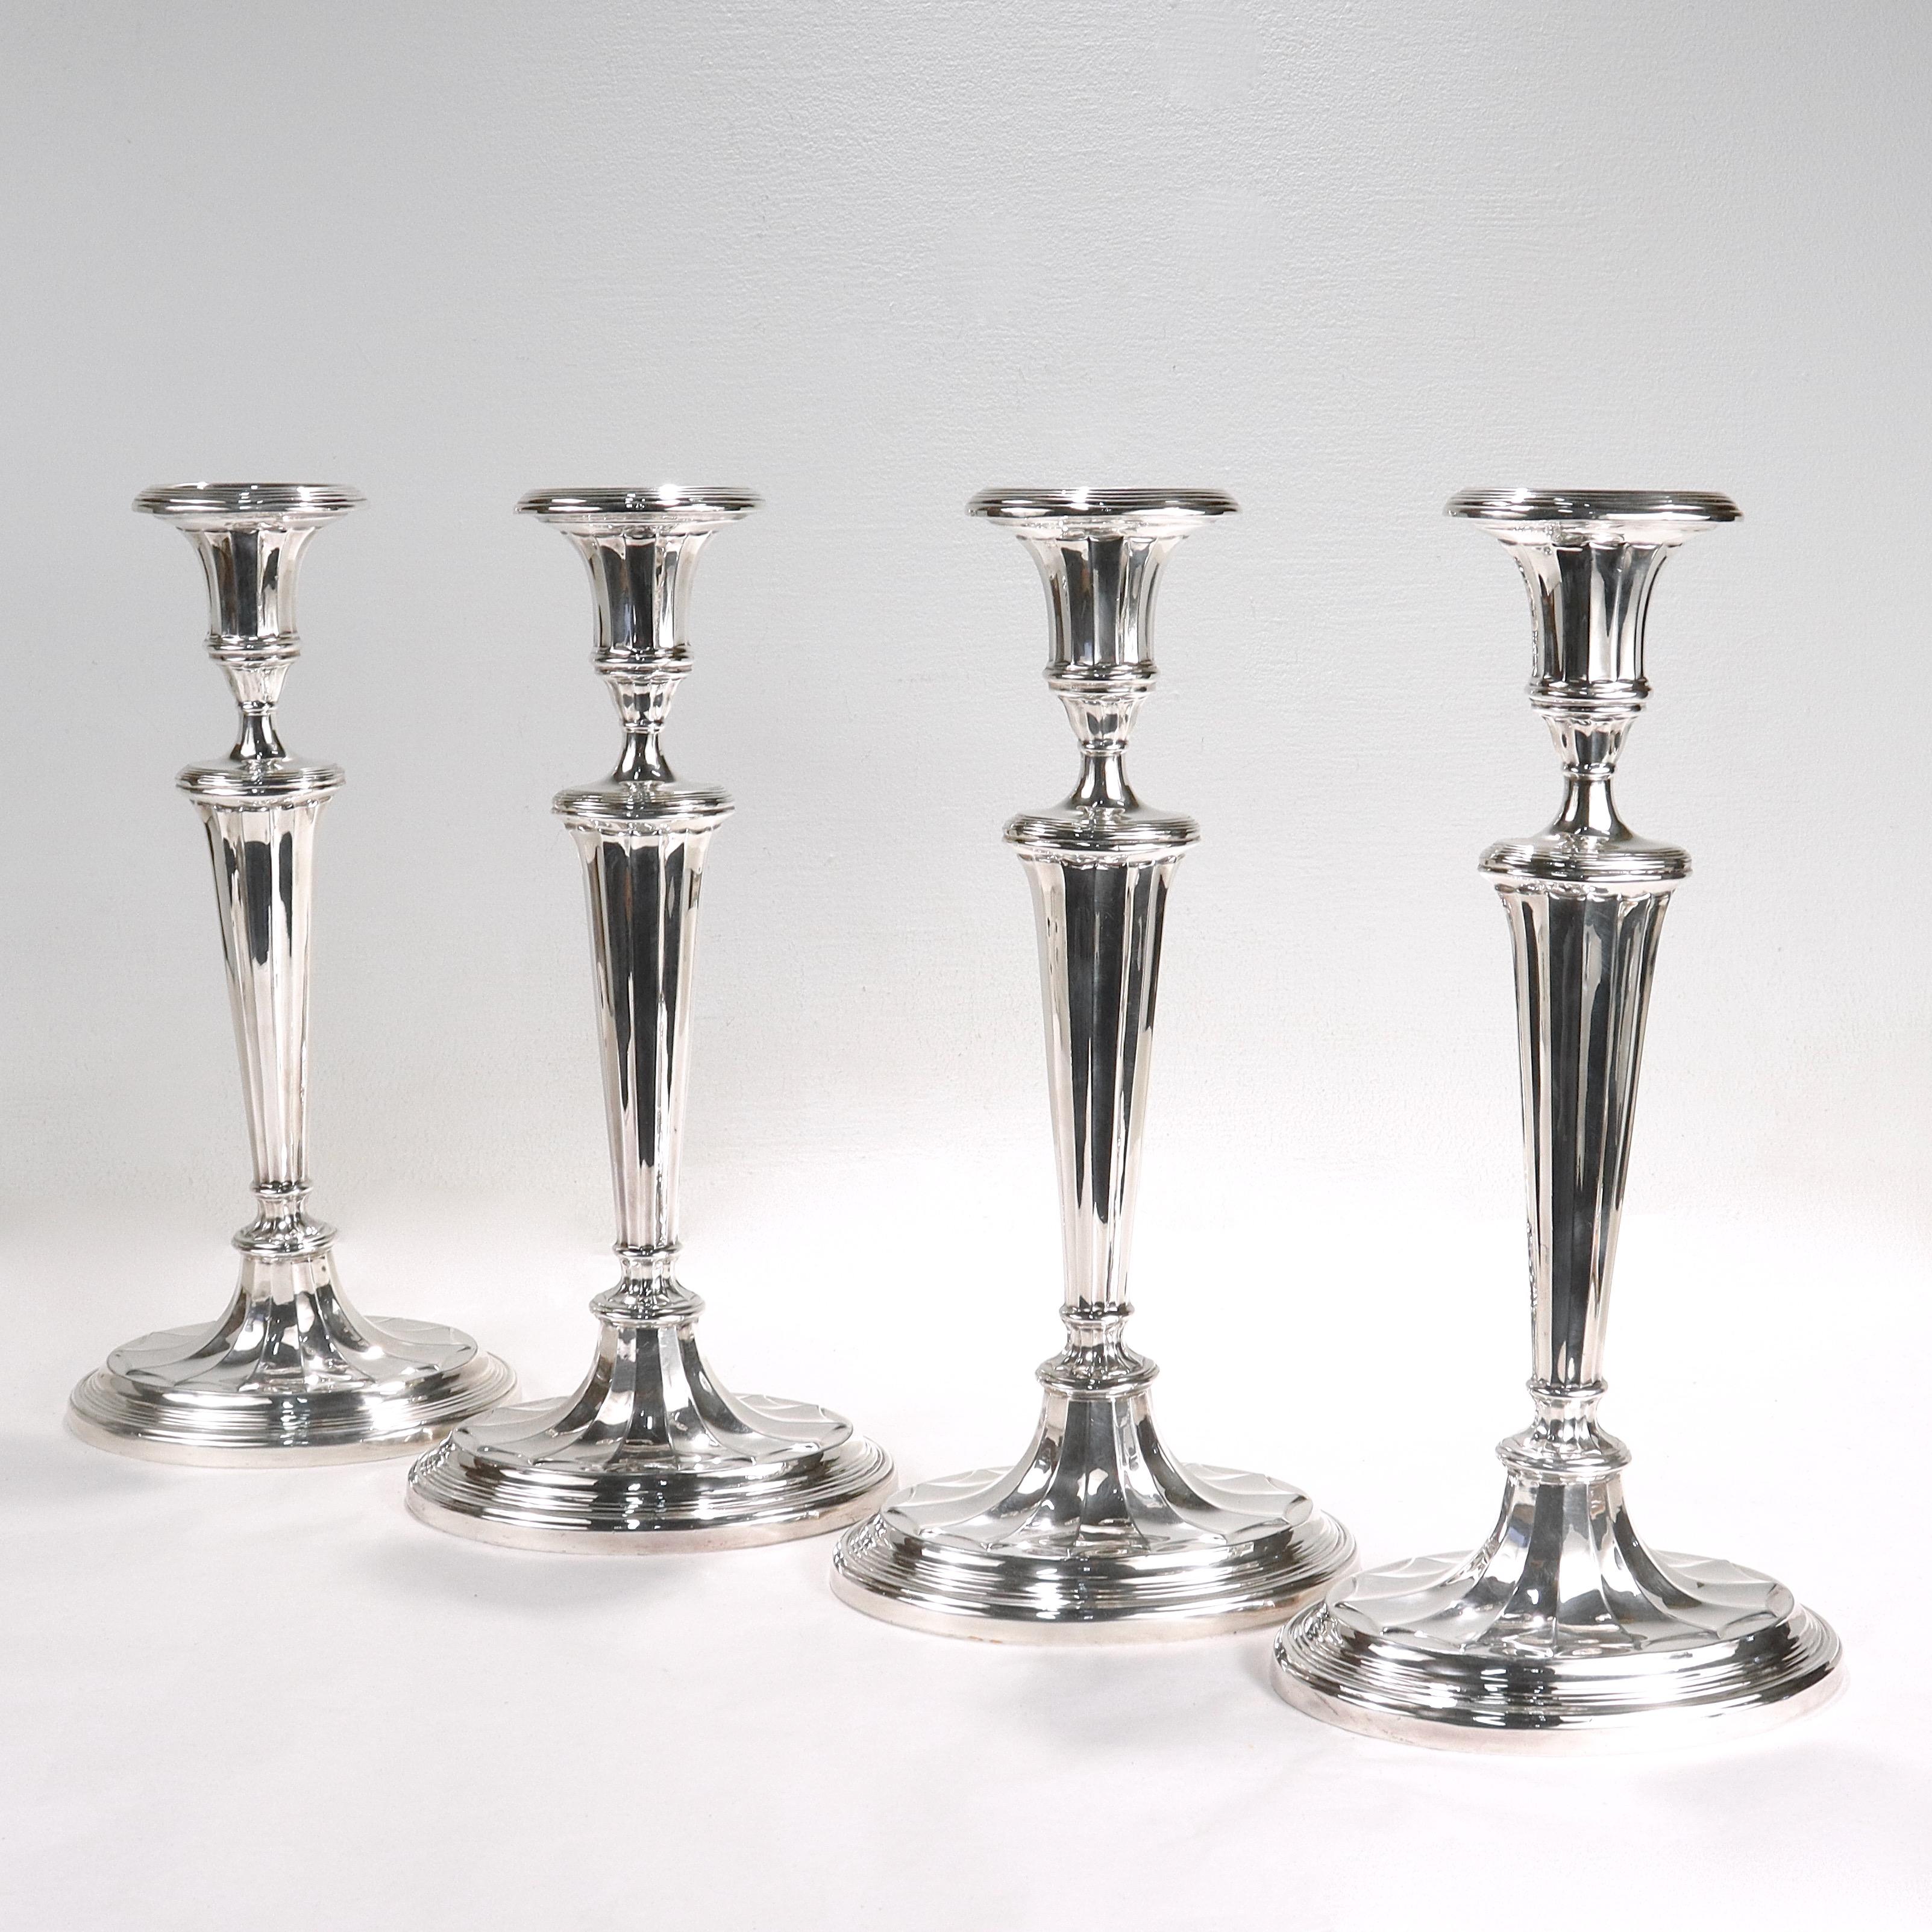 Modern Set of 4 Tall Matched Regency Style Silver Plated Candlesticks For Sale